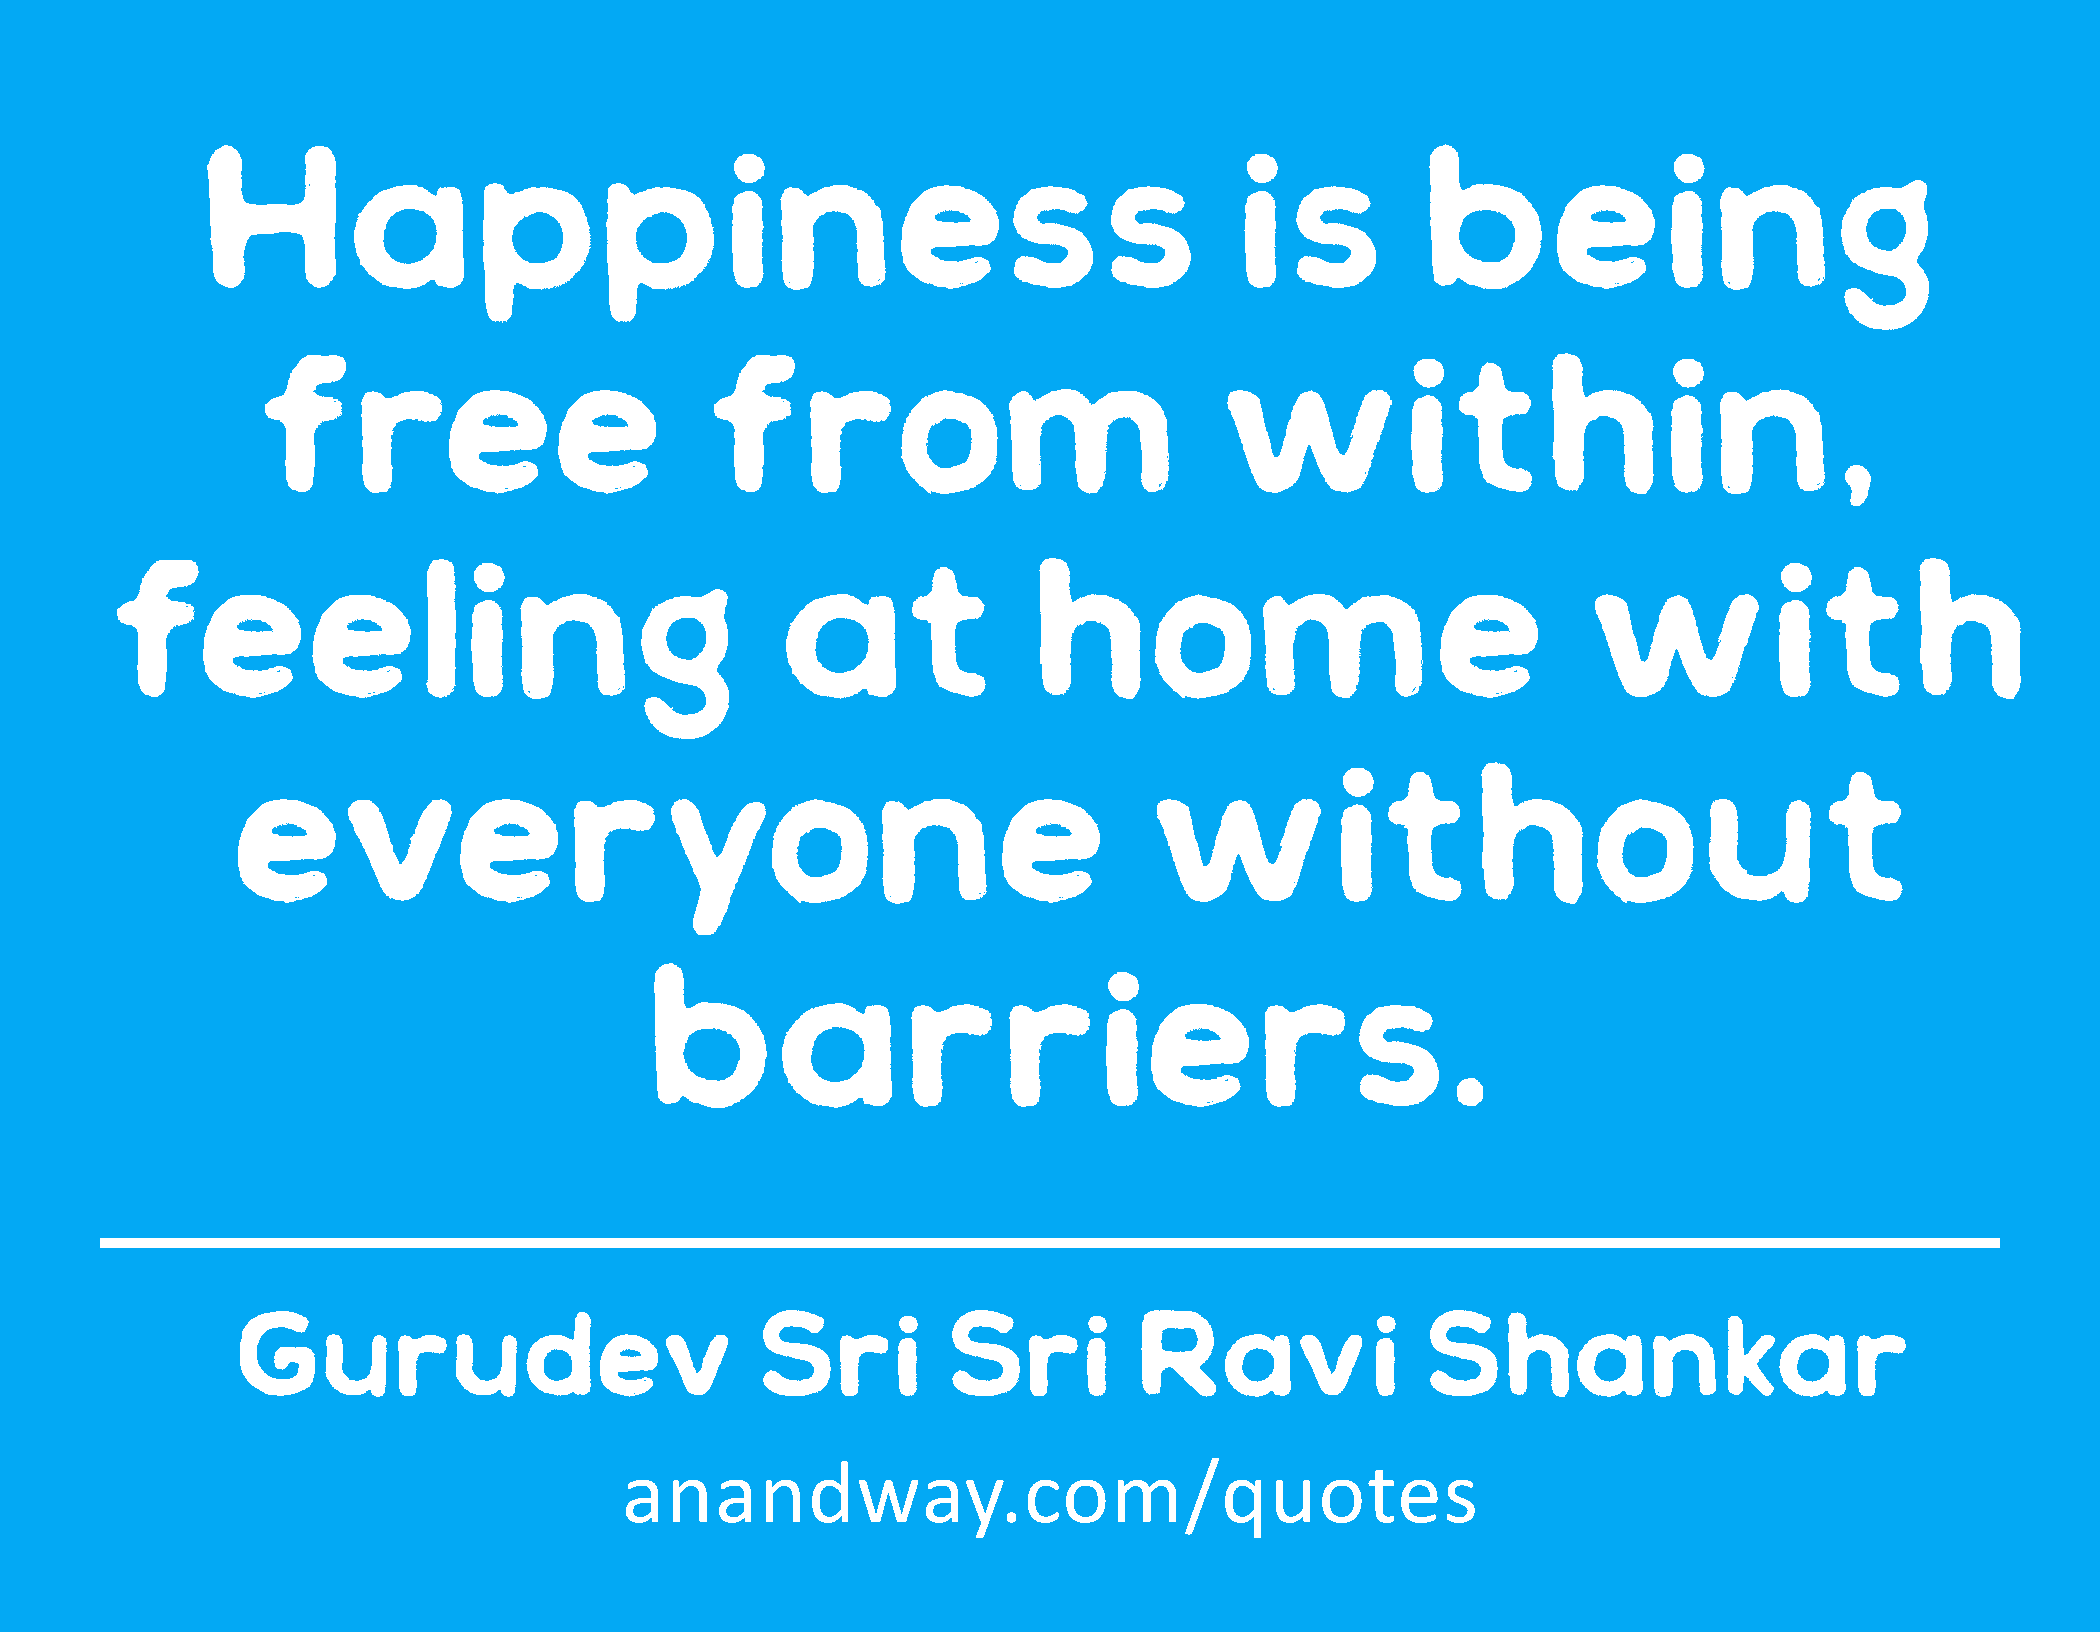 Happiness is being free from within, feeling at home with everyone without barriers. 
 -Gurudev Sri Sri Ravi Shankar